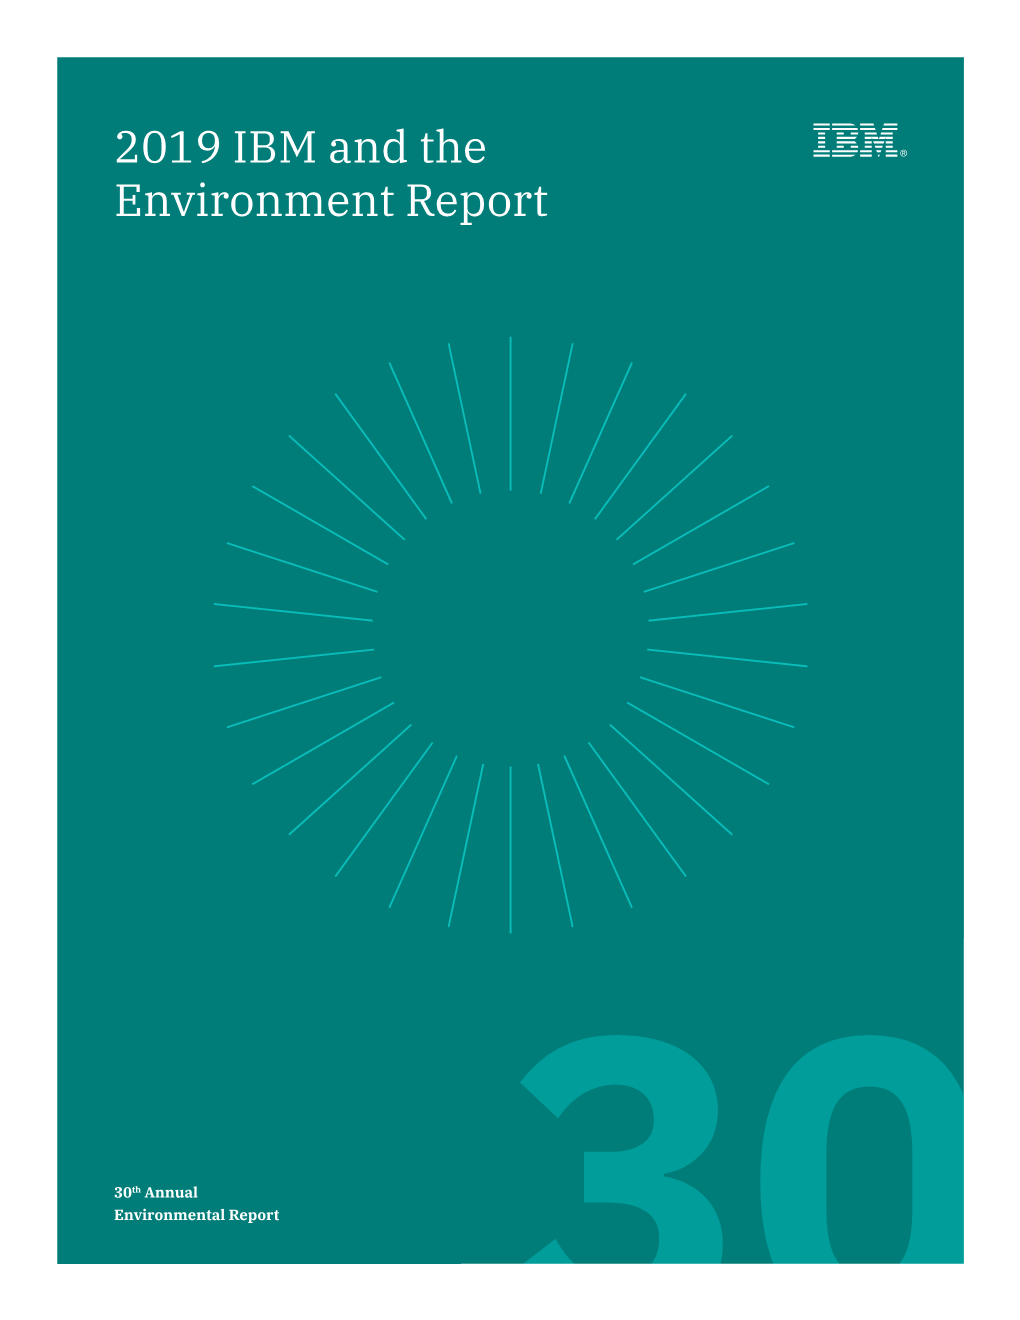 2019 IBM and the Environment Report